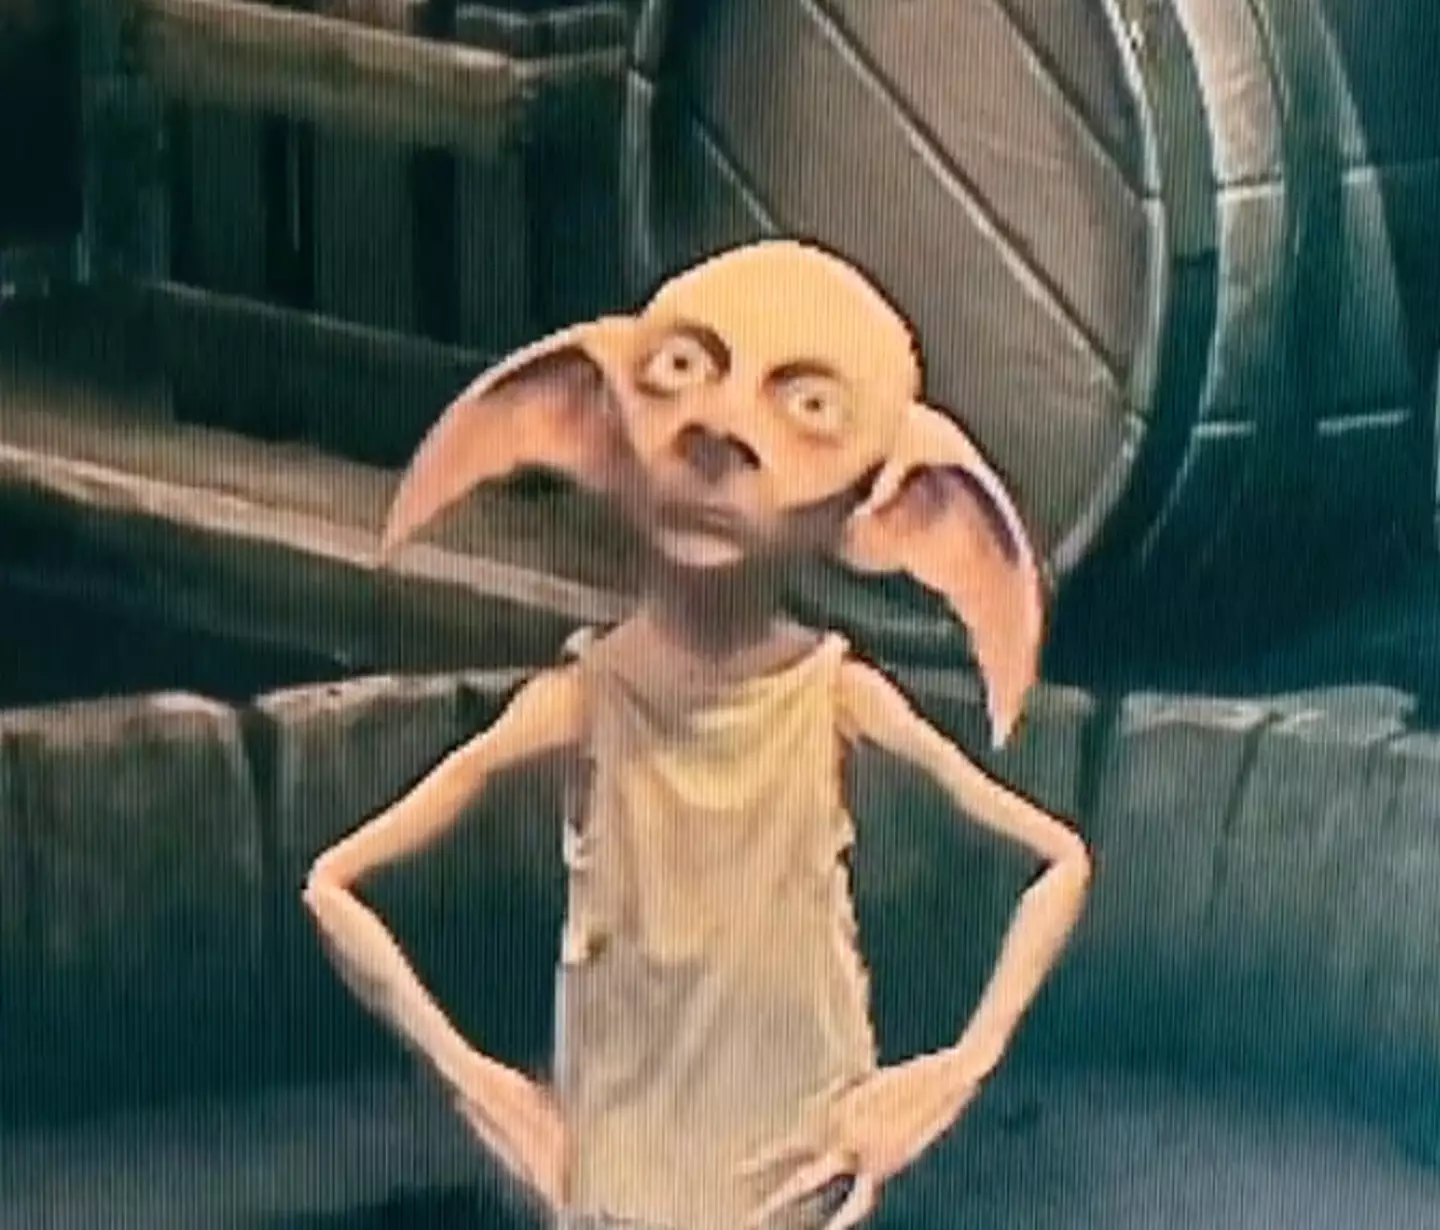 Gamers can't get over how much Dobby looks like Rowan Atkinson in Hogwarts Legacy.